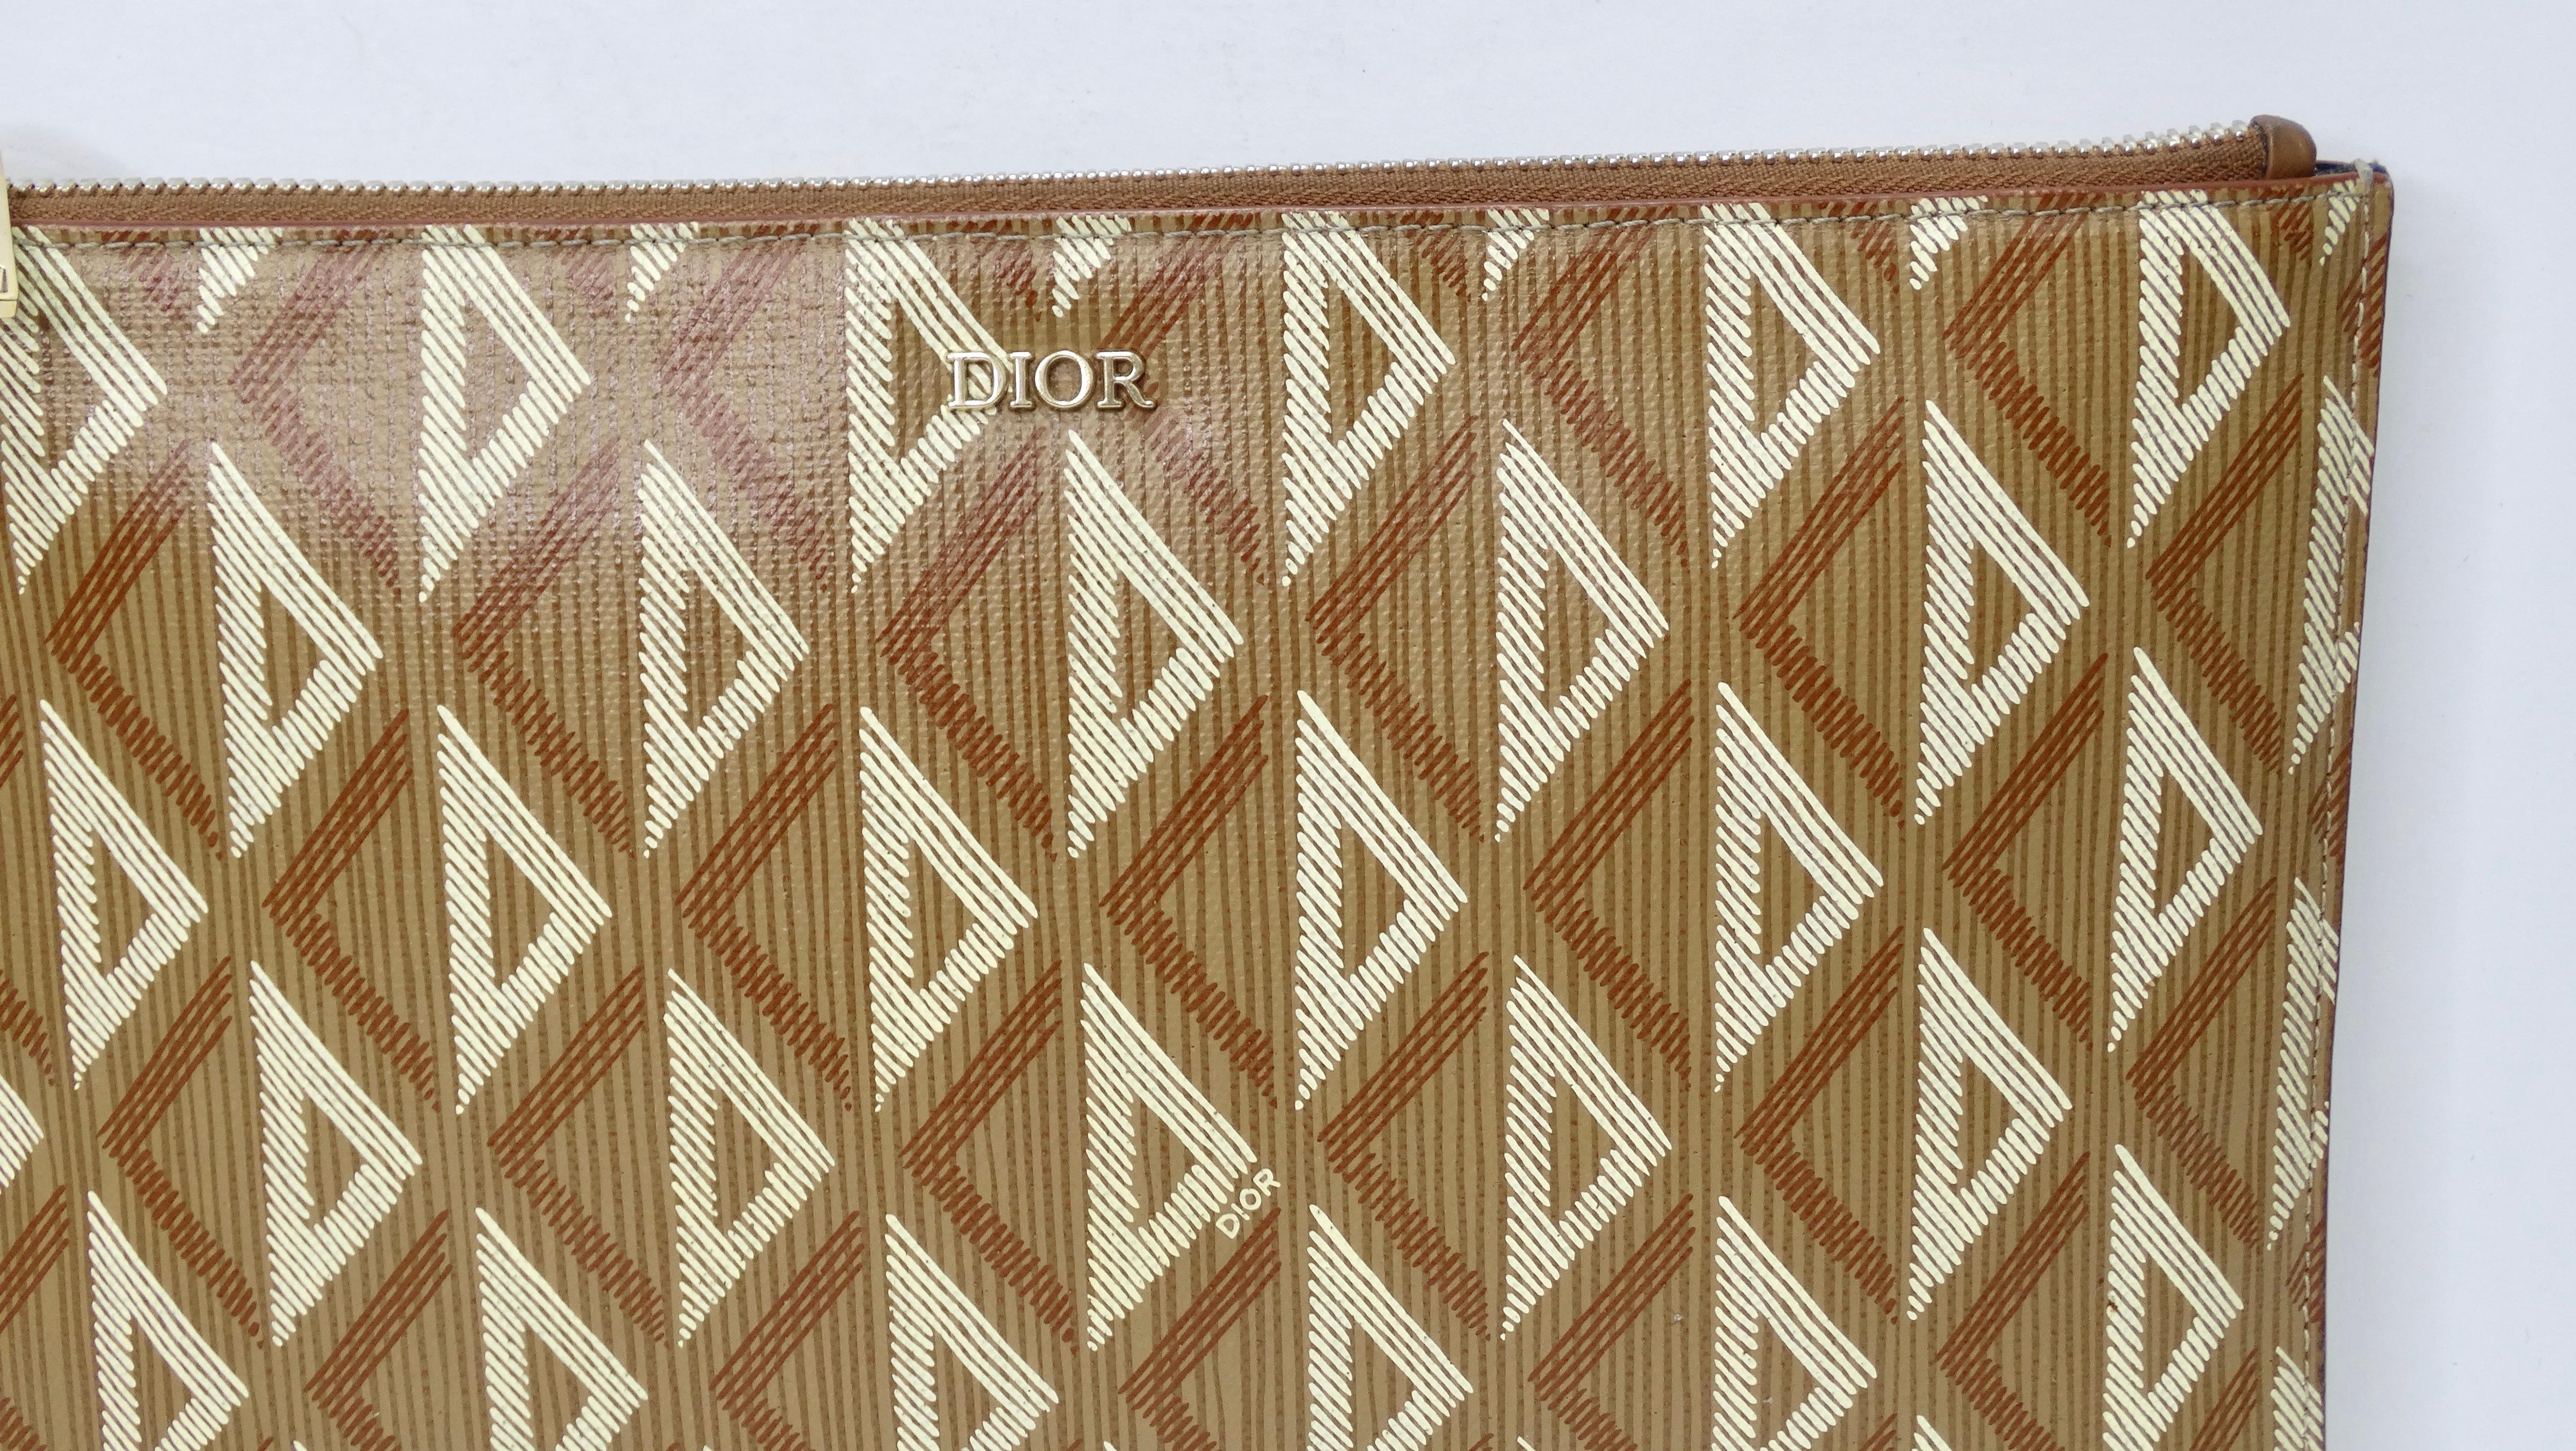 Get yourself a piece of this iconic Dior today! Featured in a beige and brown, this pouch is a known as a house staple, crafted in natural CD Diamond canvas inspired by the archives. Marc Bohan's 1974 graphic CD Diamond design revisits the 'CD'